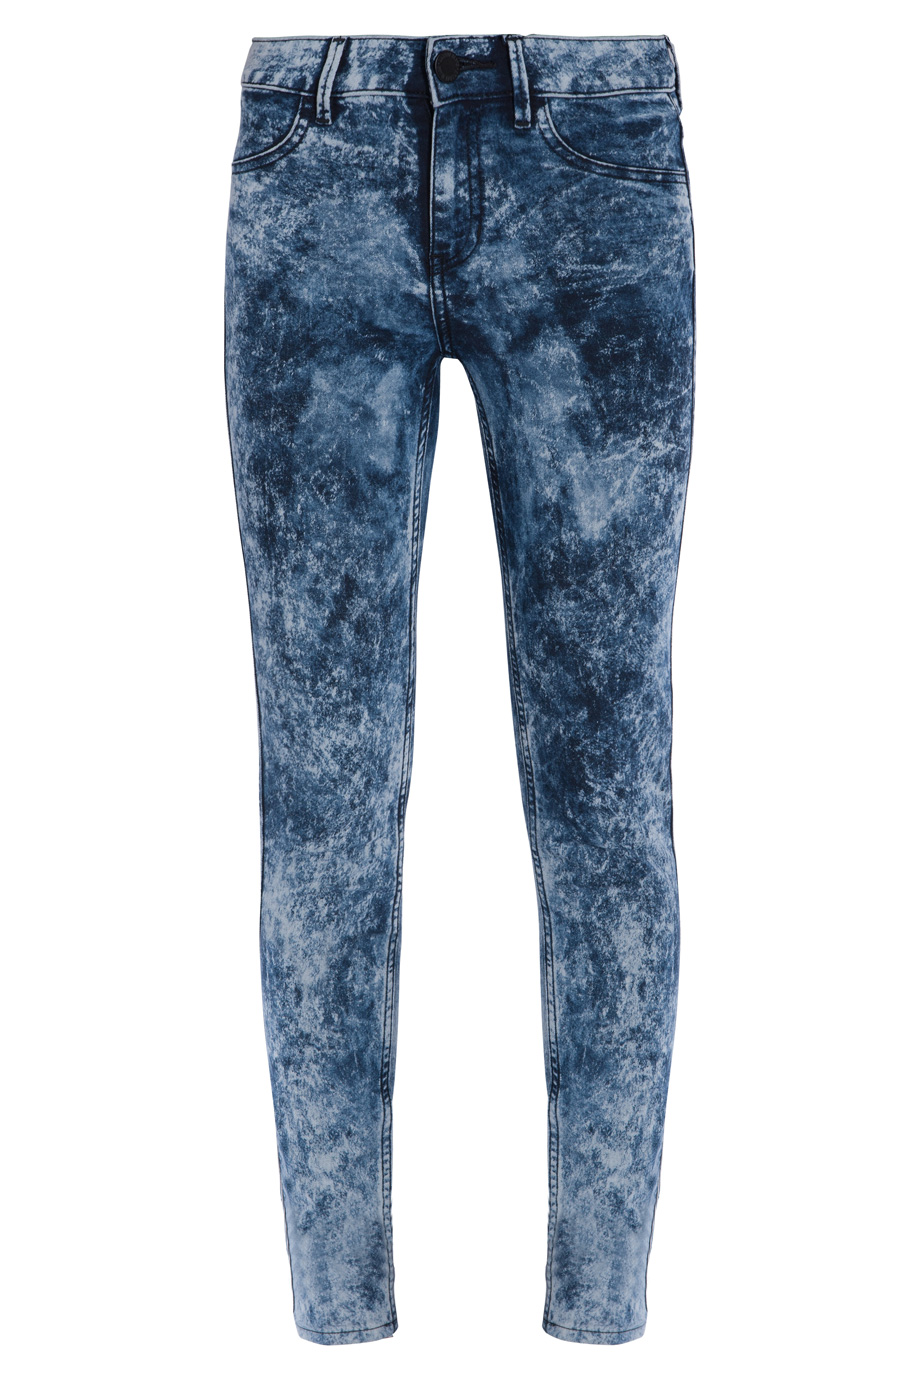 2nd day Jolie Xray Stonewash Pants in Gray | Lyst